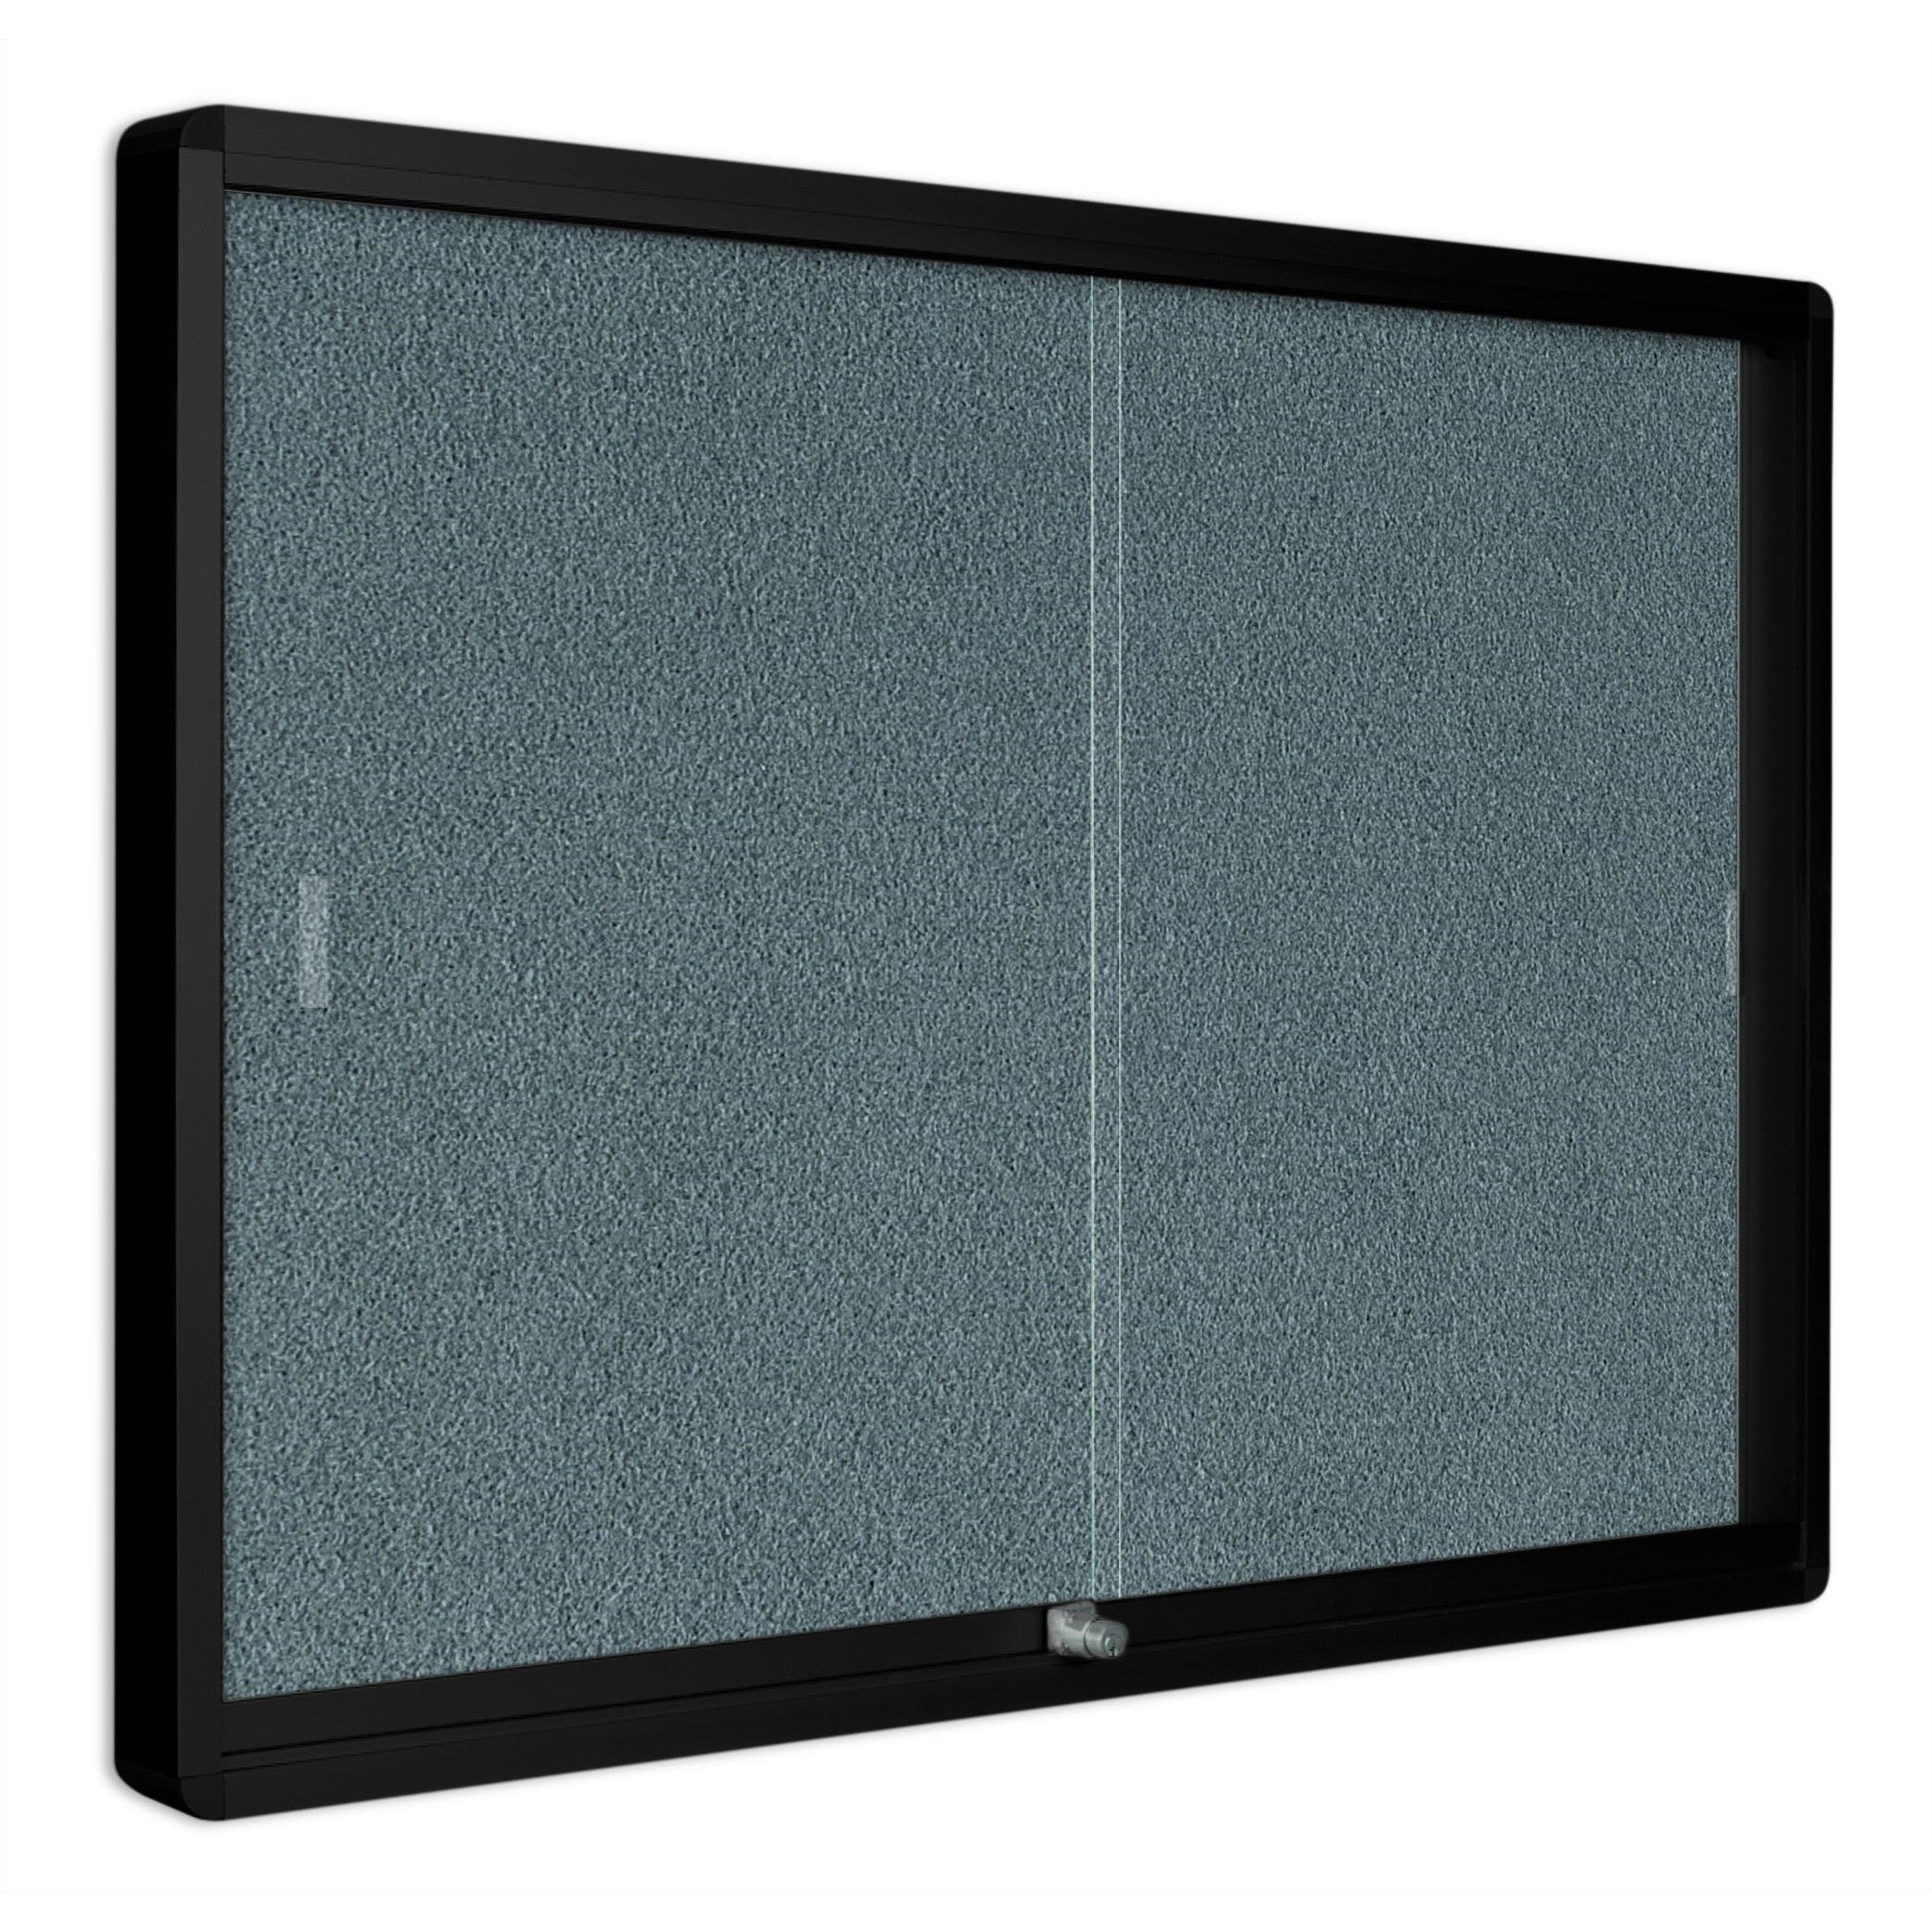 VT640103717 Enclosed Locking Sliding Doors Bulletin Board, Wall Mounting Gray Fabric Message Board, 38" x 45", Black Aluminum Frame by MasterVision